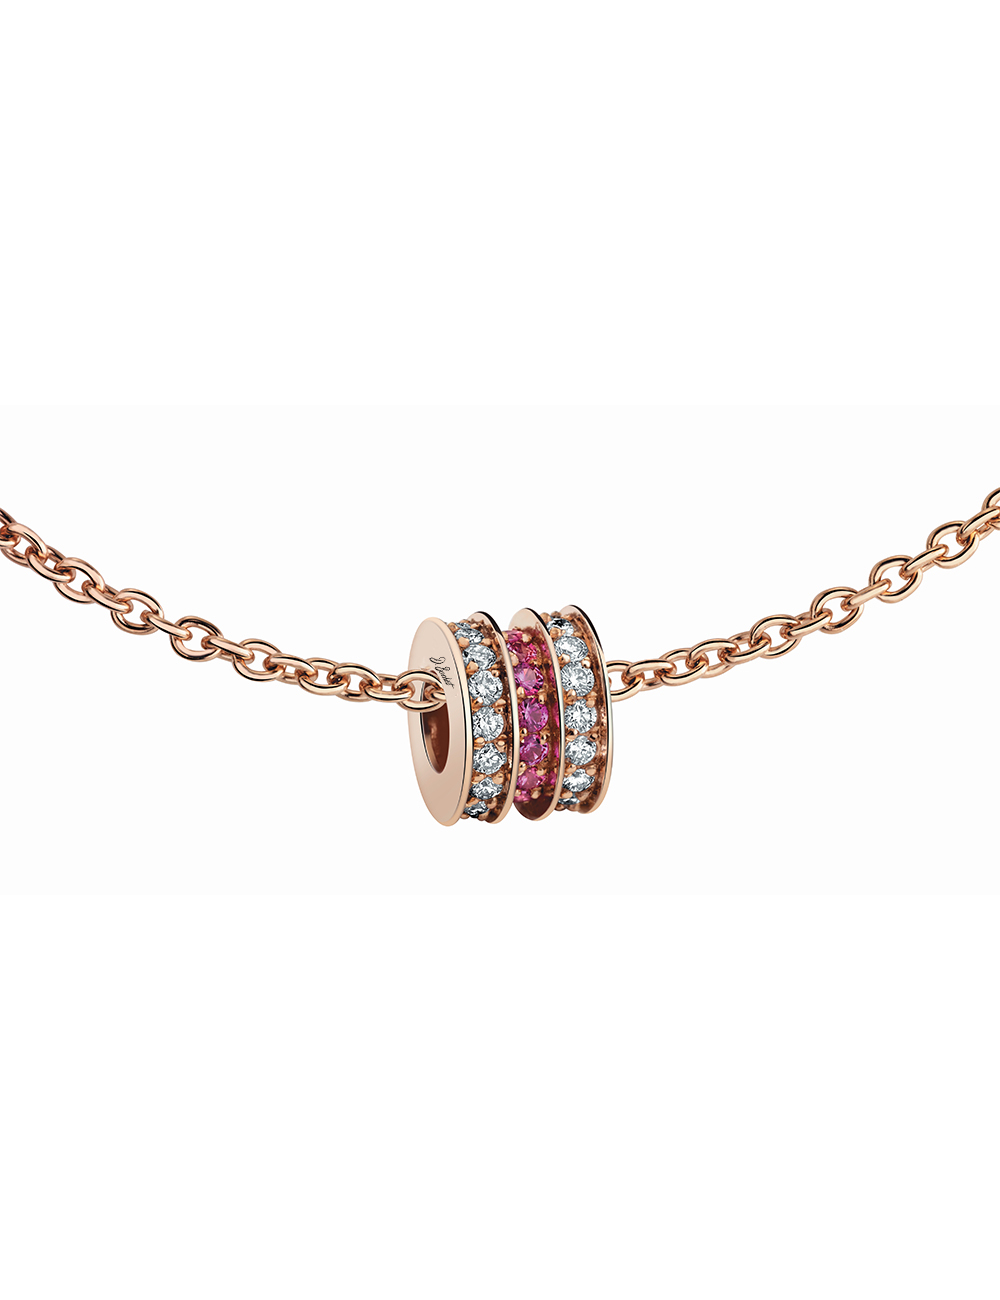 Rose gold pendant with white diamonds and pink sapphires, refined luxury.